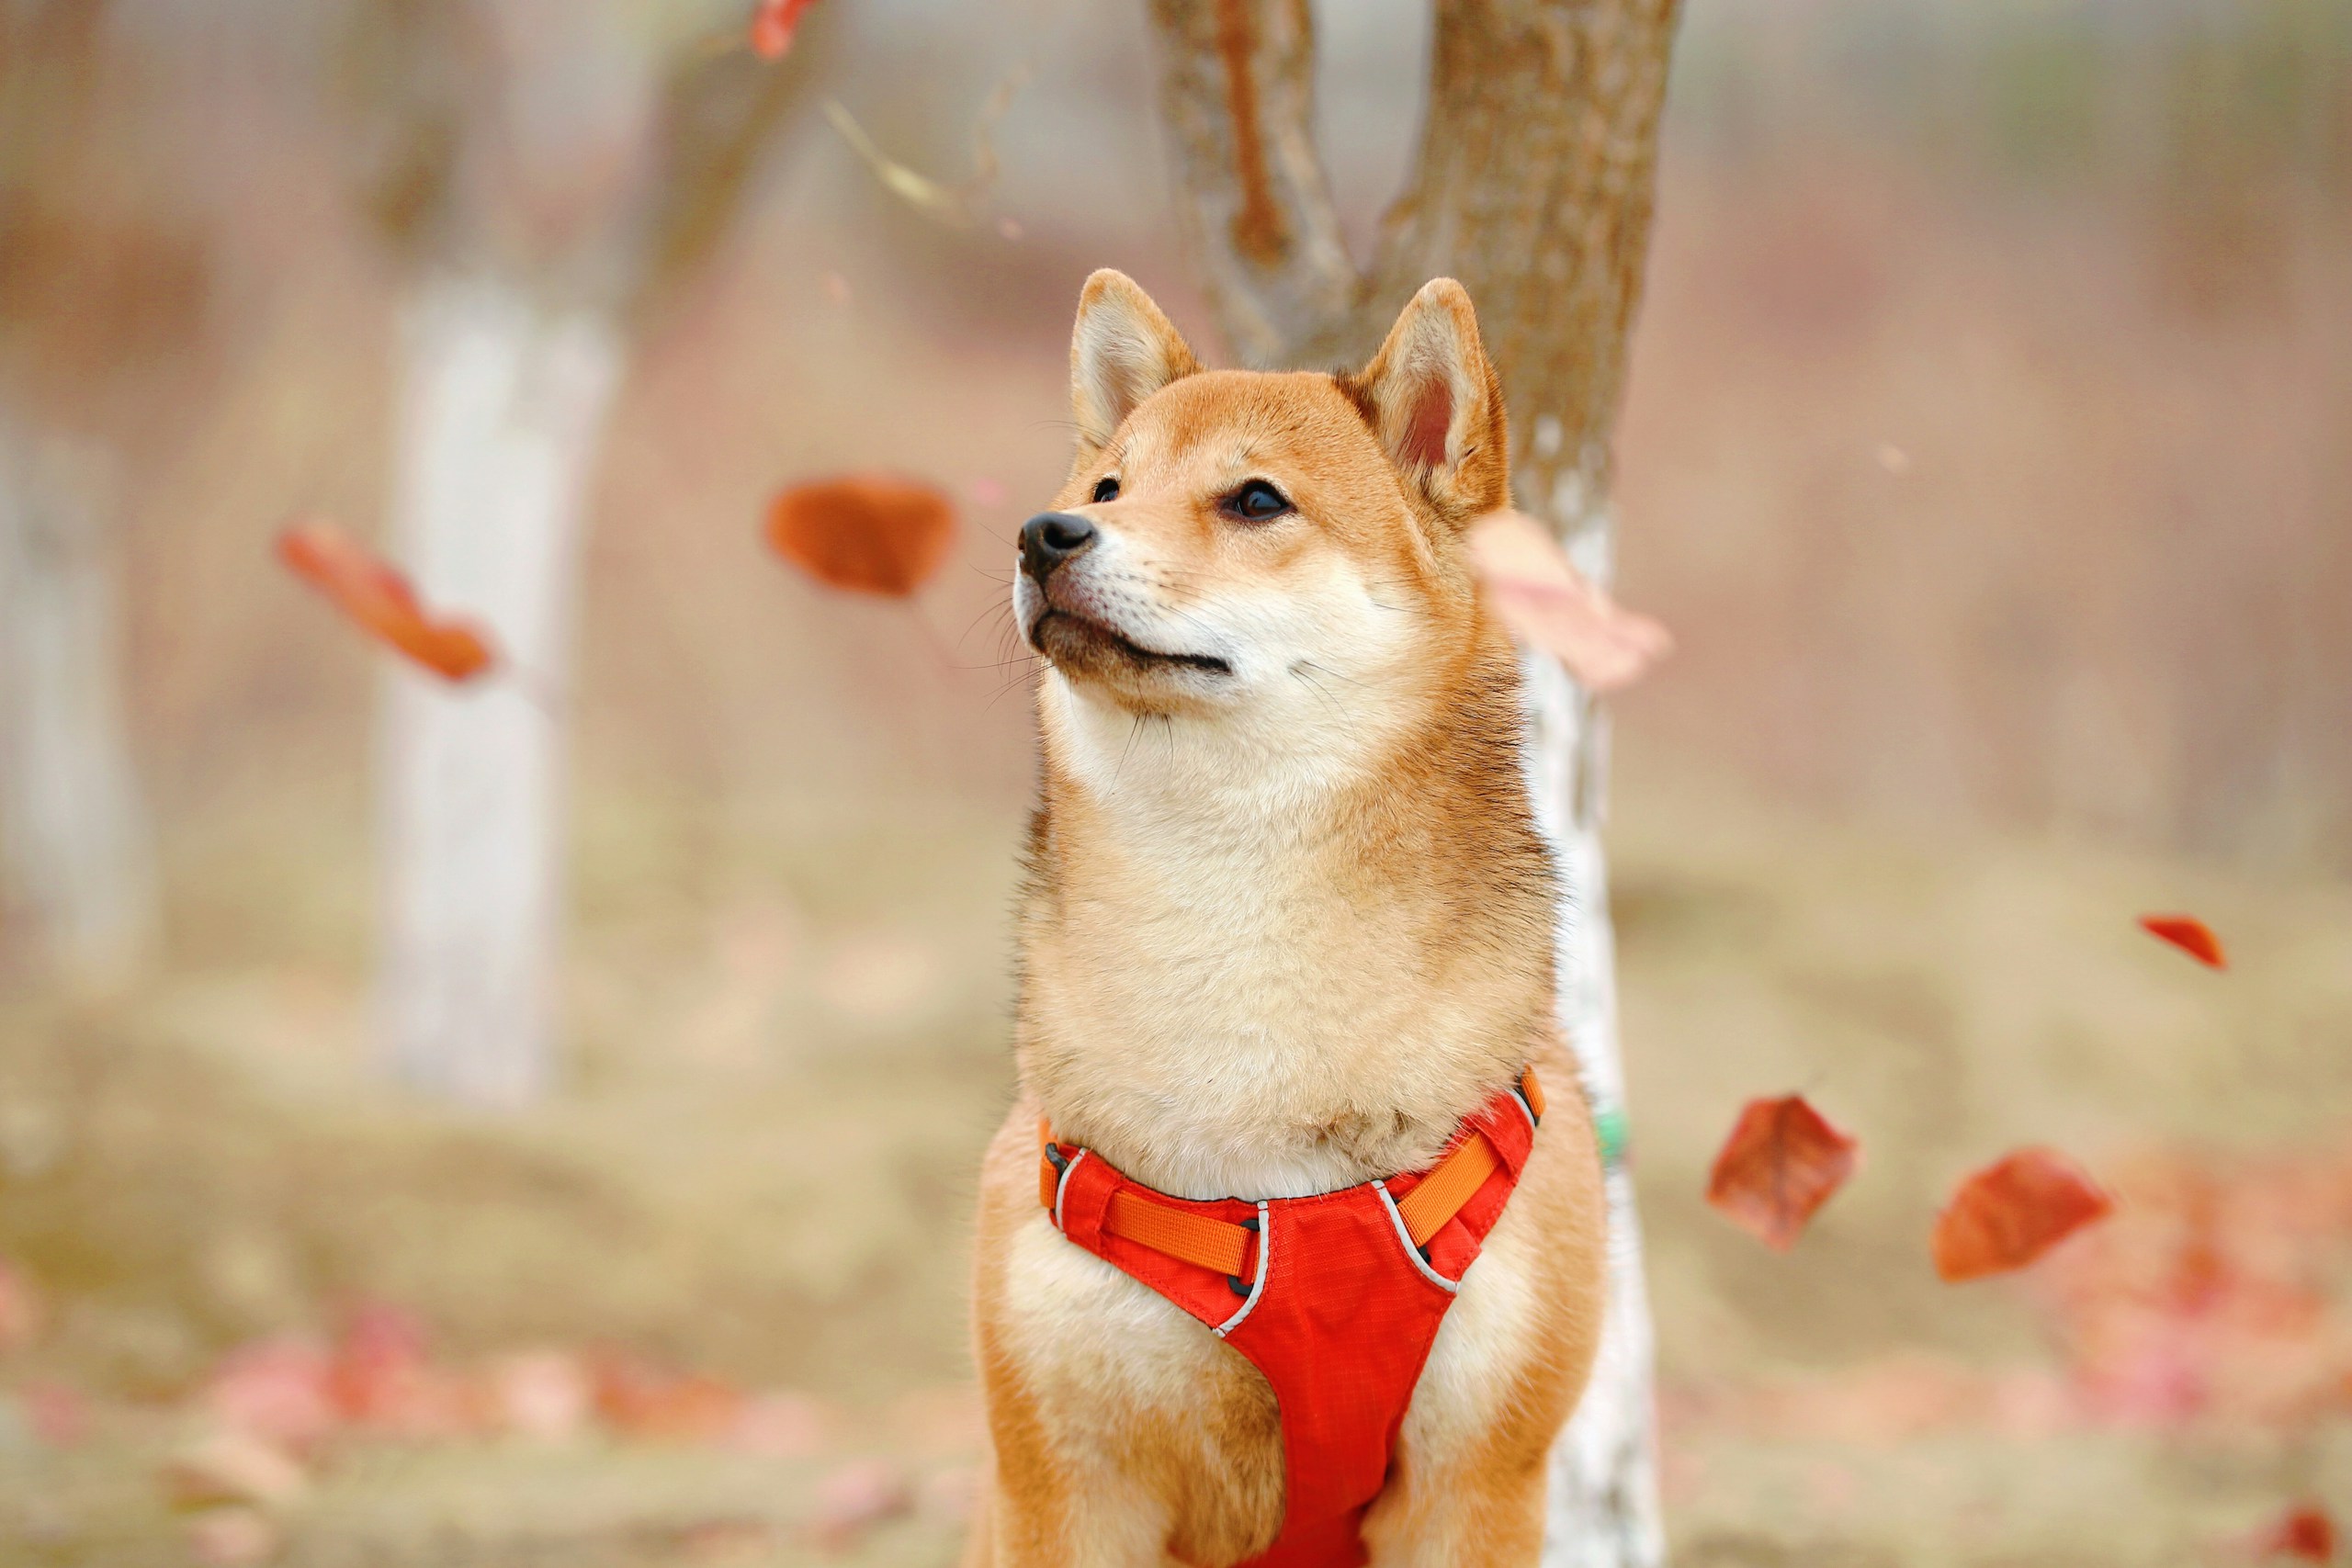 Dogecoin (DOGE) surges over 100% as Bitcoin bull run takes ...